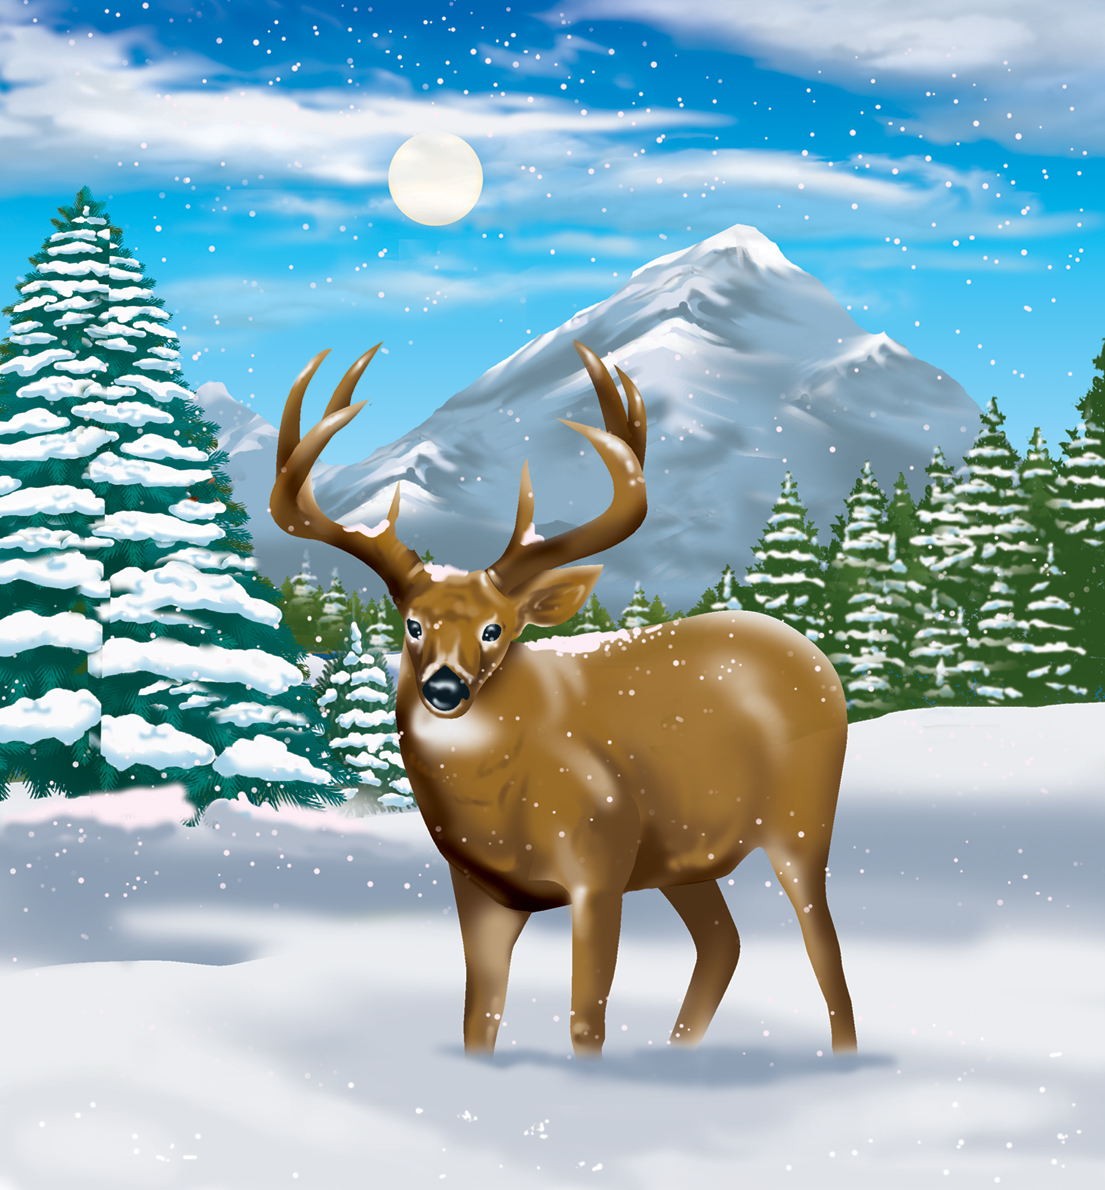 Reindeer and caribou are similar, but not the same - Reindeer are symbols of the holiday season. Legend states these antlered animals have a busy evening come December 24 - helping Santa Claus pull a sleigh weighed down by toys for the world's children. Why does Santa choose reindeer when caribou may be equally qualified for the job? It may be due to their greater history of domestication.